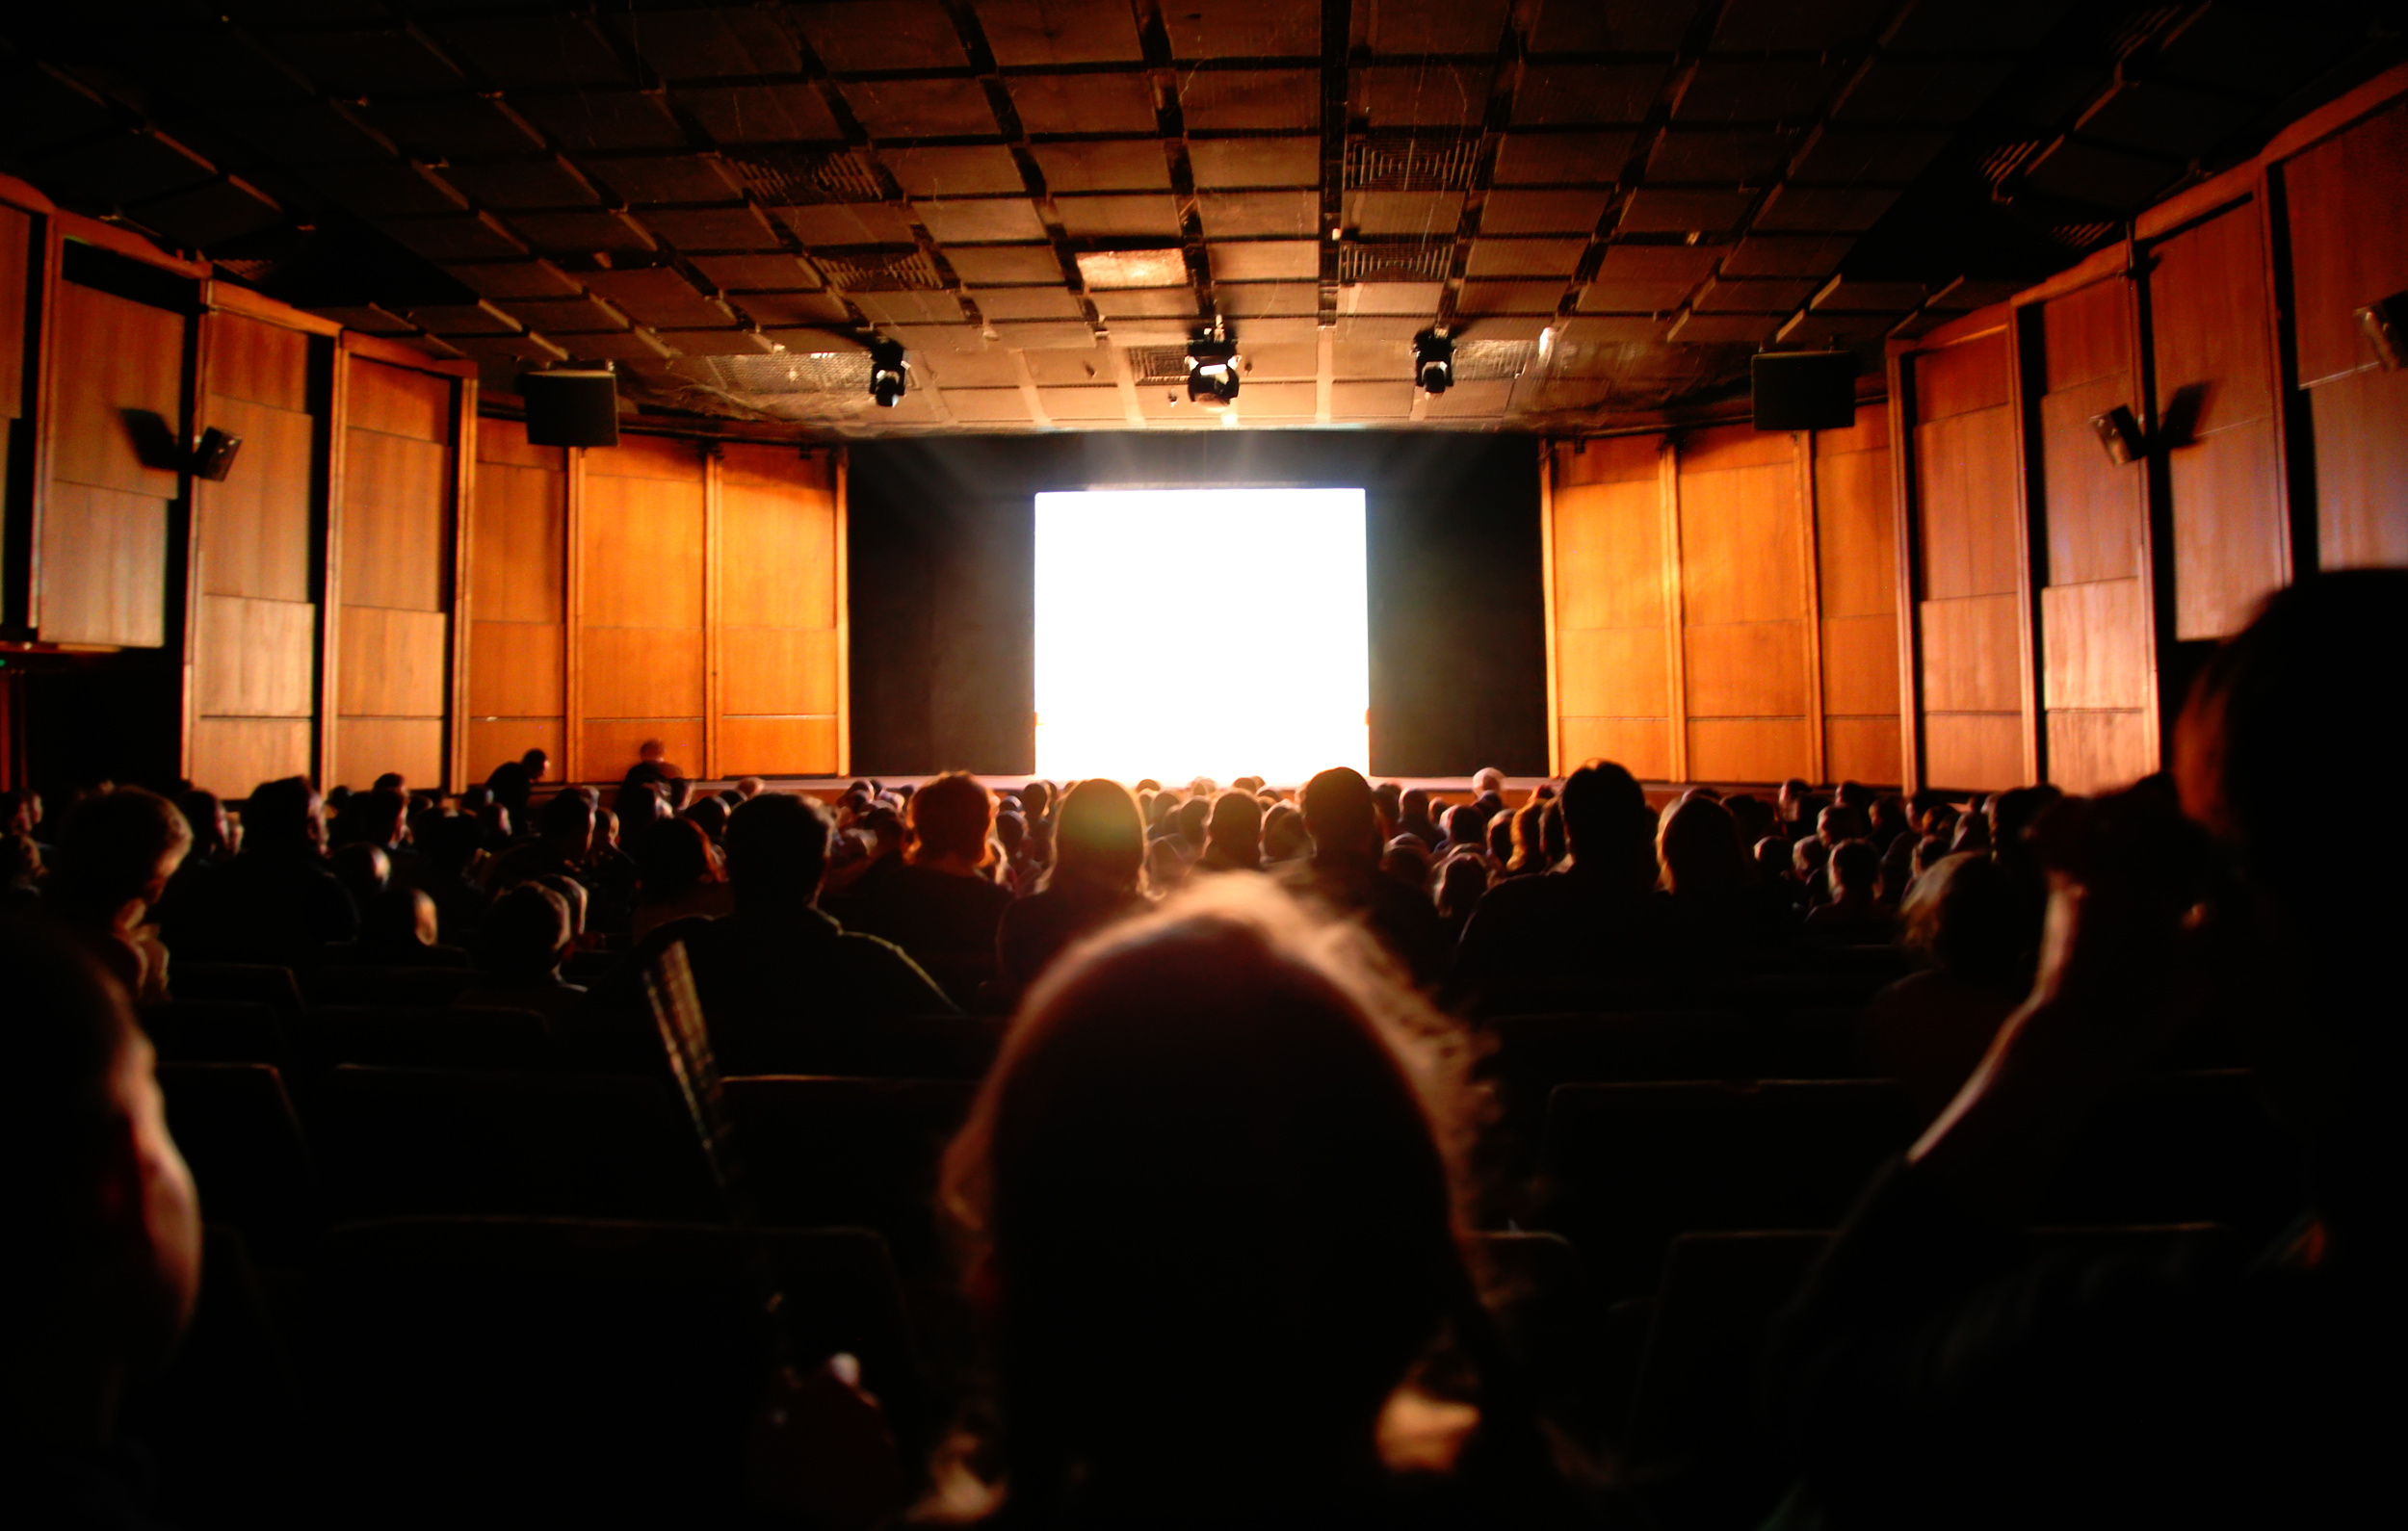 Are you scaring your audience unintentionally?